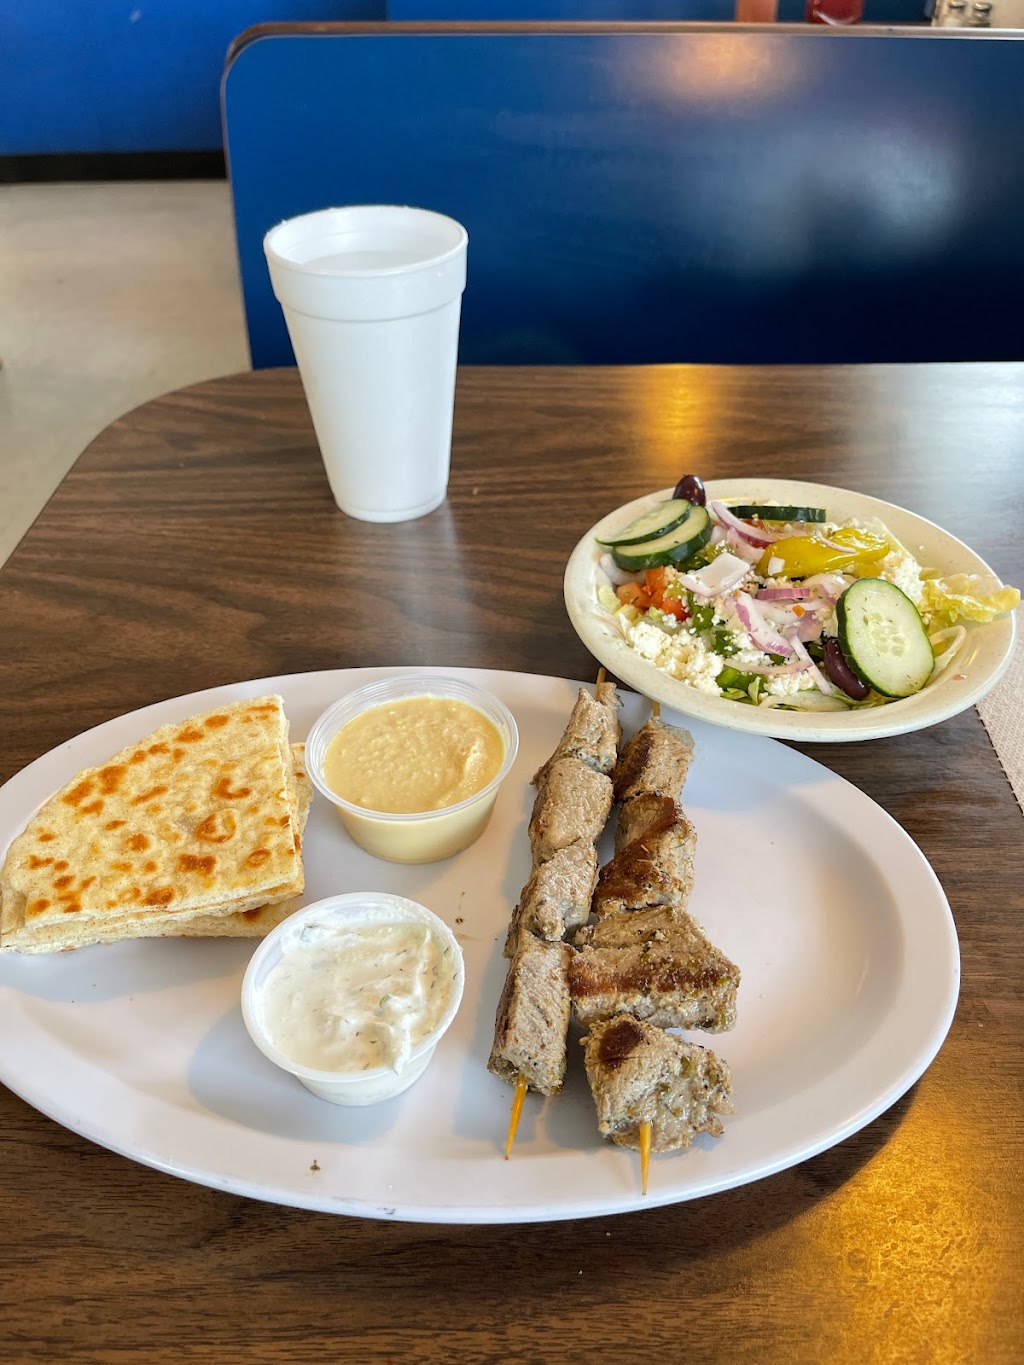 The Greek Grill | 1520 Lewisville Clemmons Rd, Clemmons, NC 27012, USA | Phone: (336) 293-4777